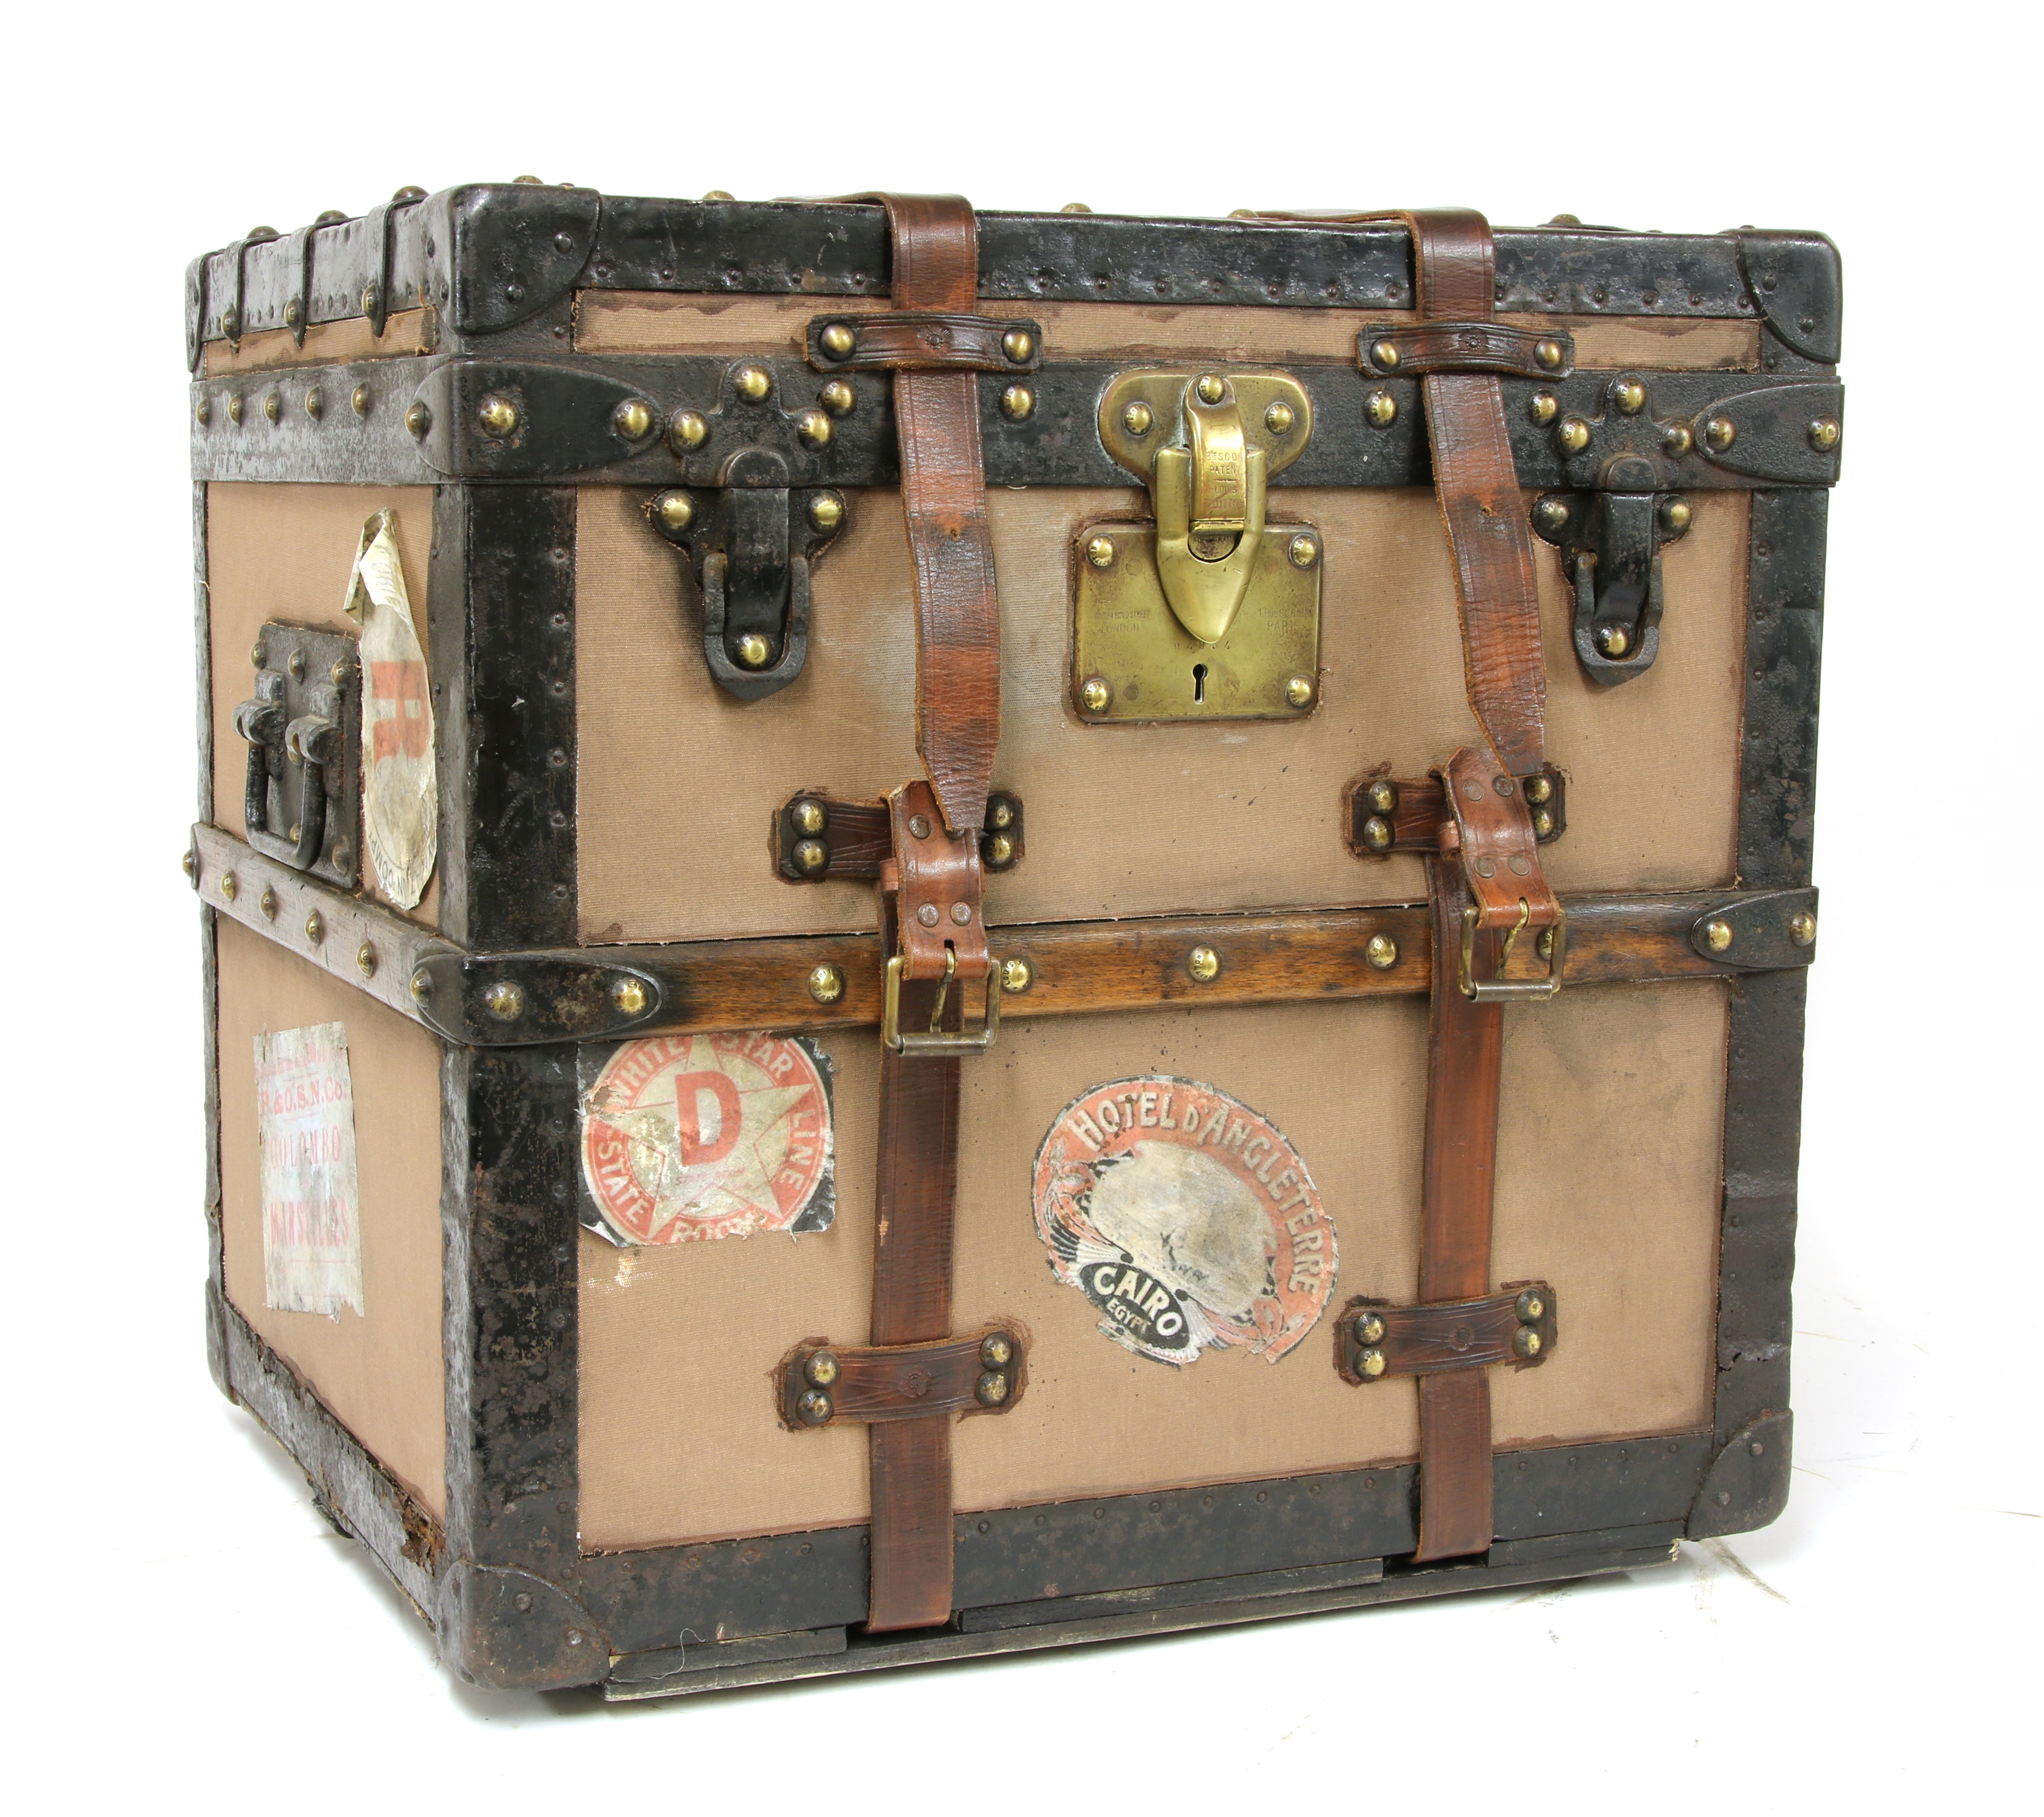 2020'S LOUIS VUITTON WATCH TRUNK for sale by auction in London